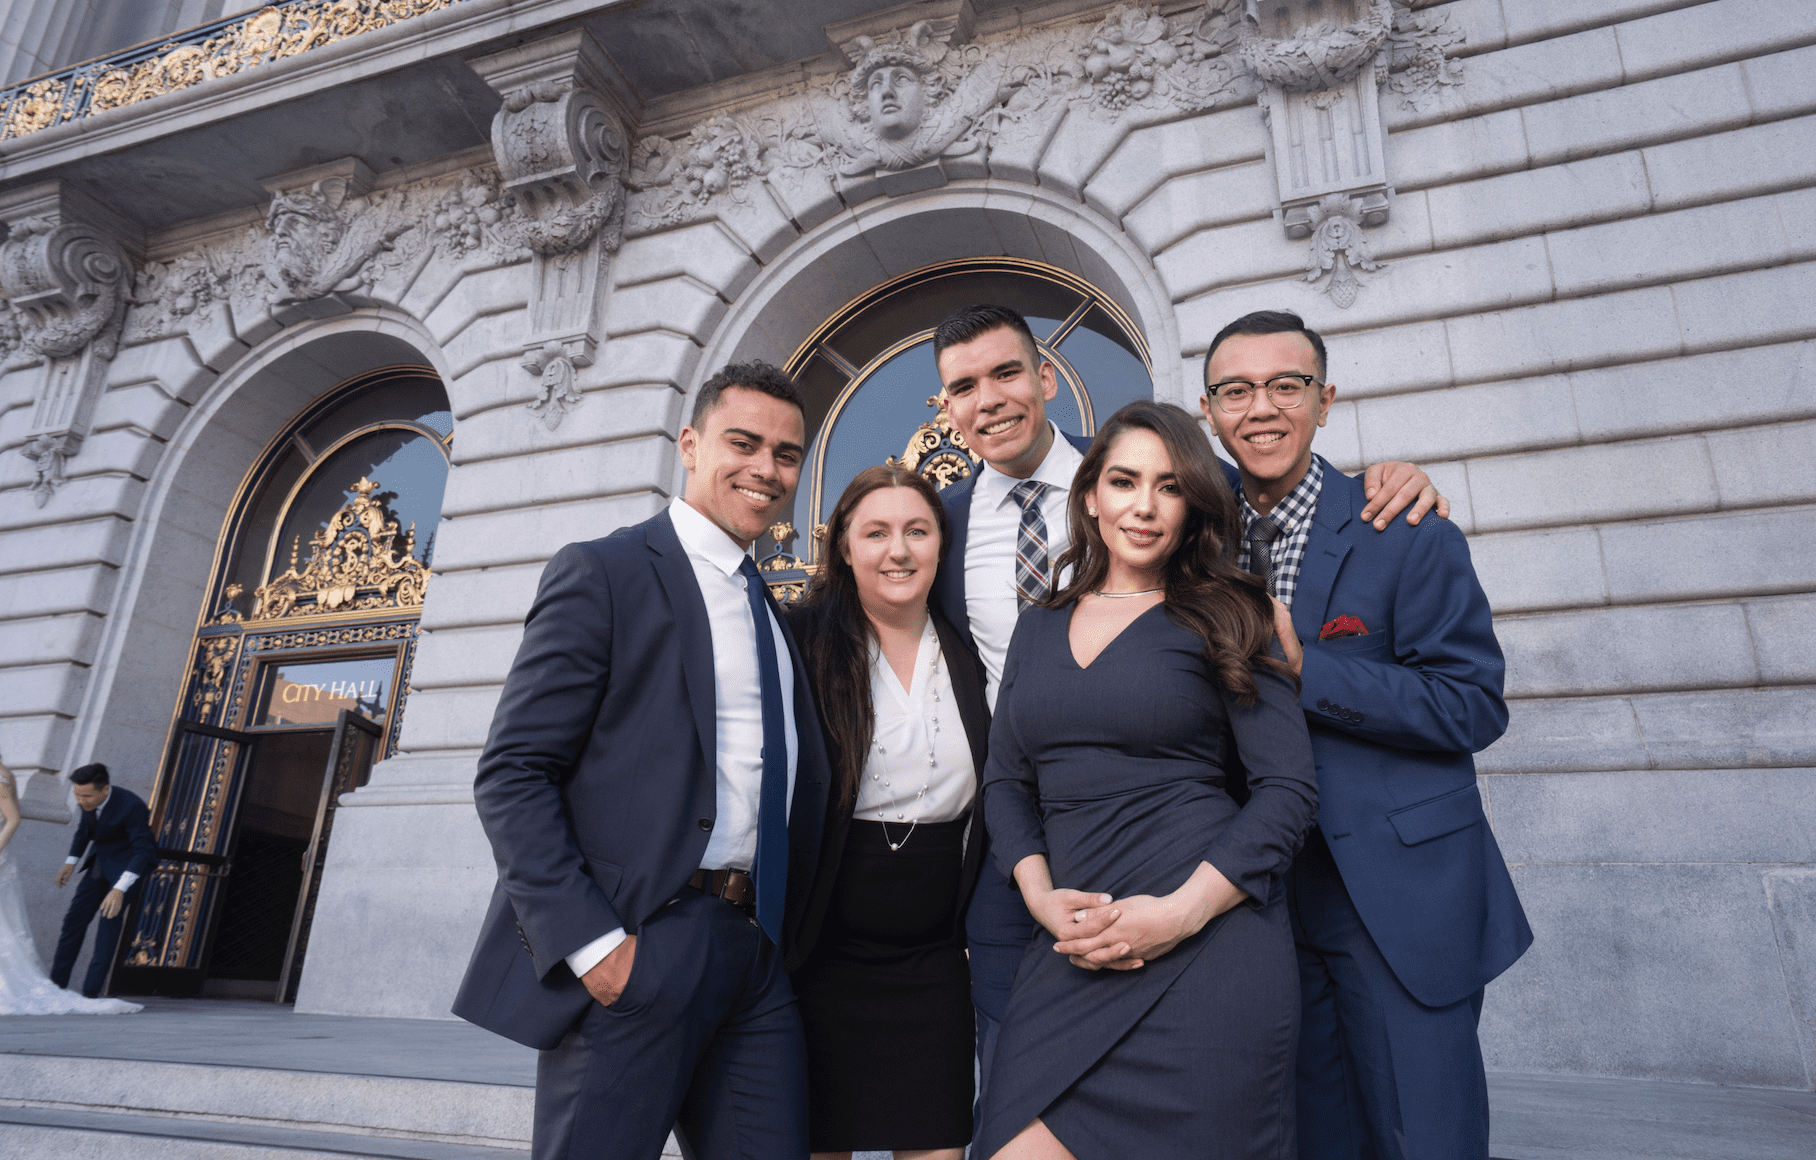 Five LEOP students gathered in front of San Francisco City Hall